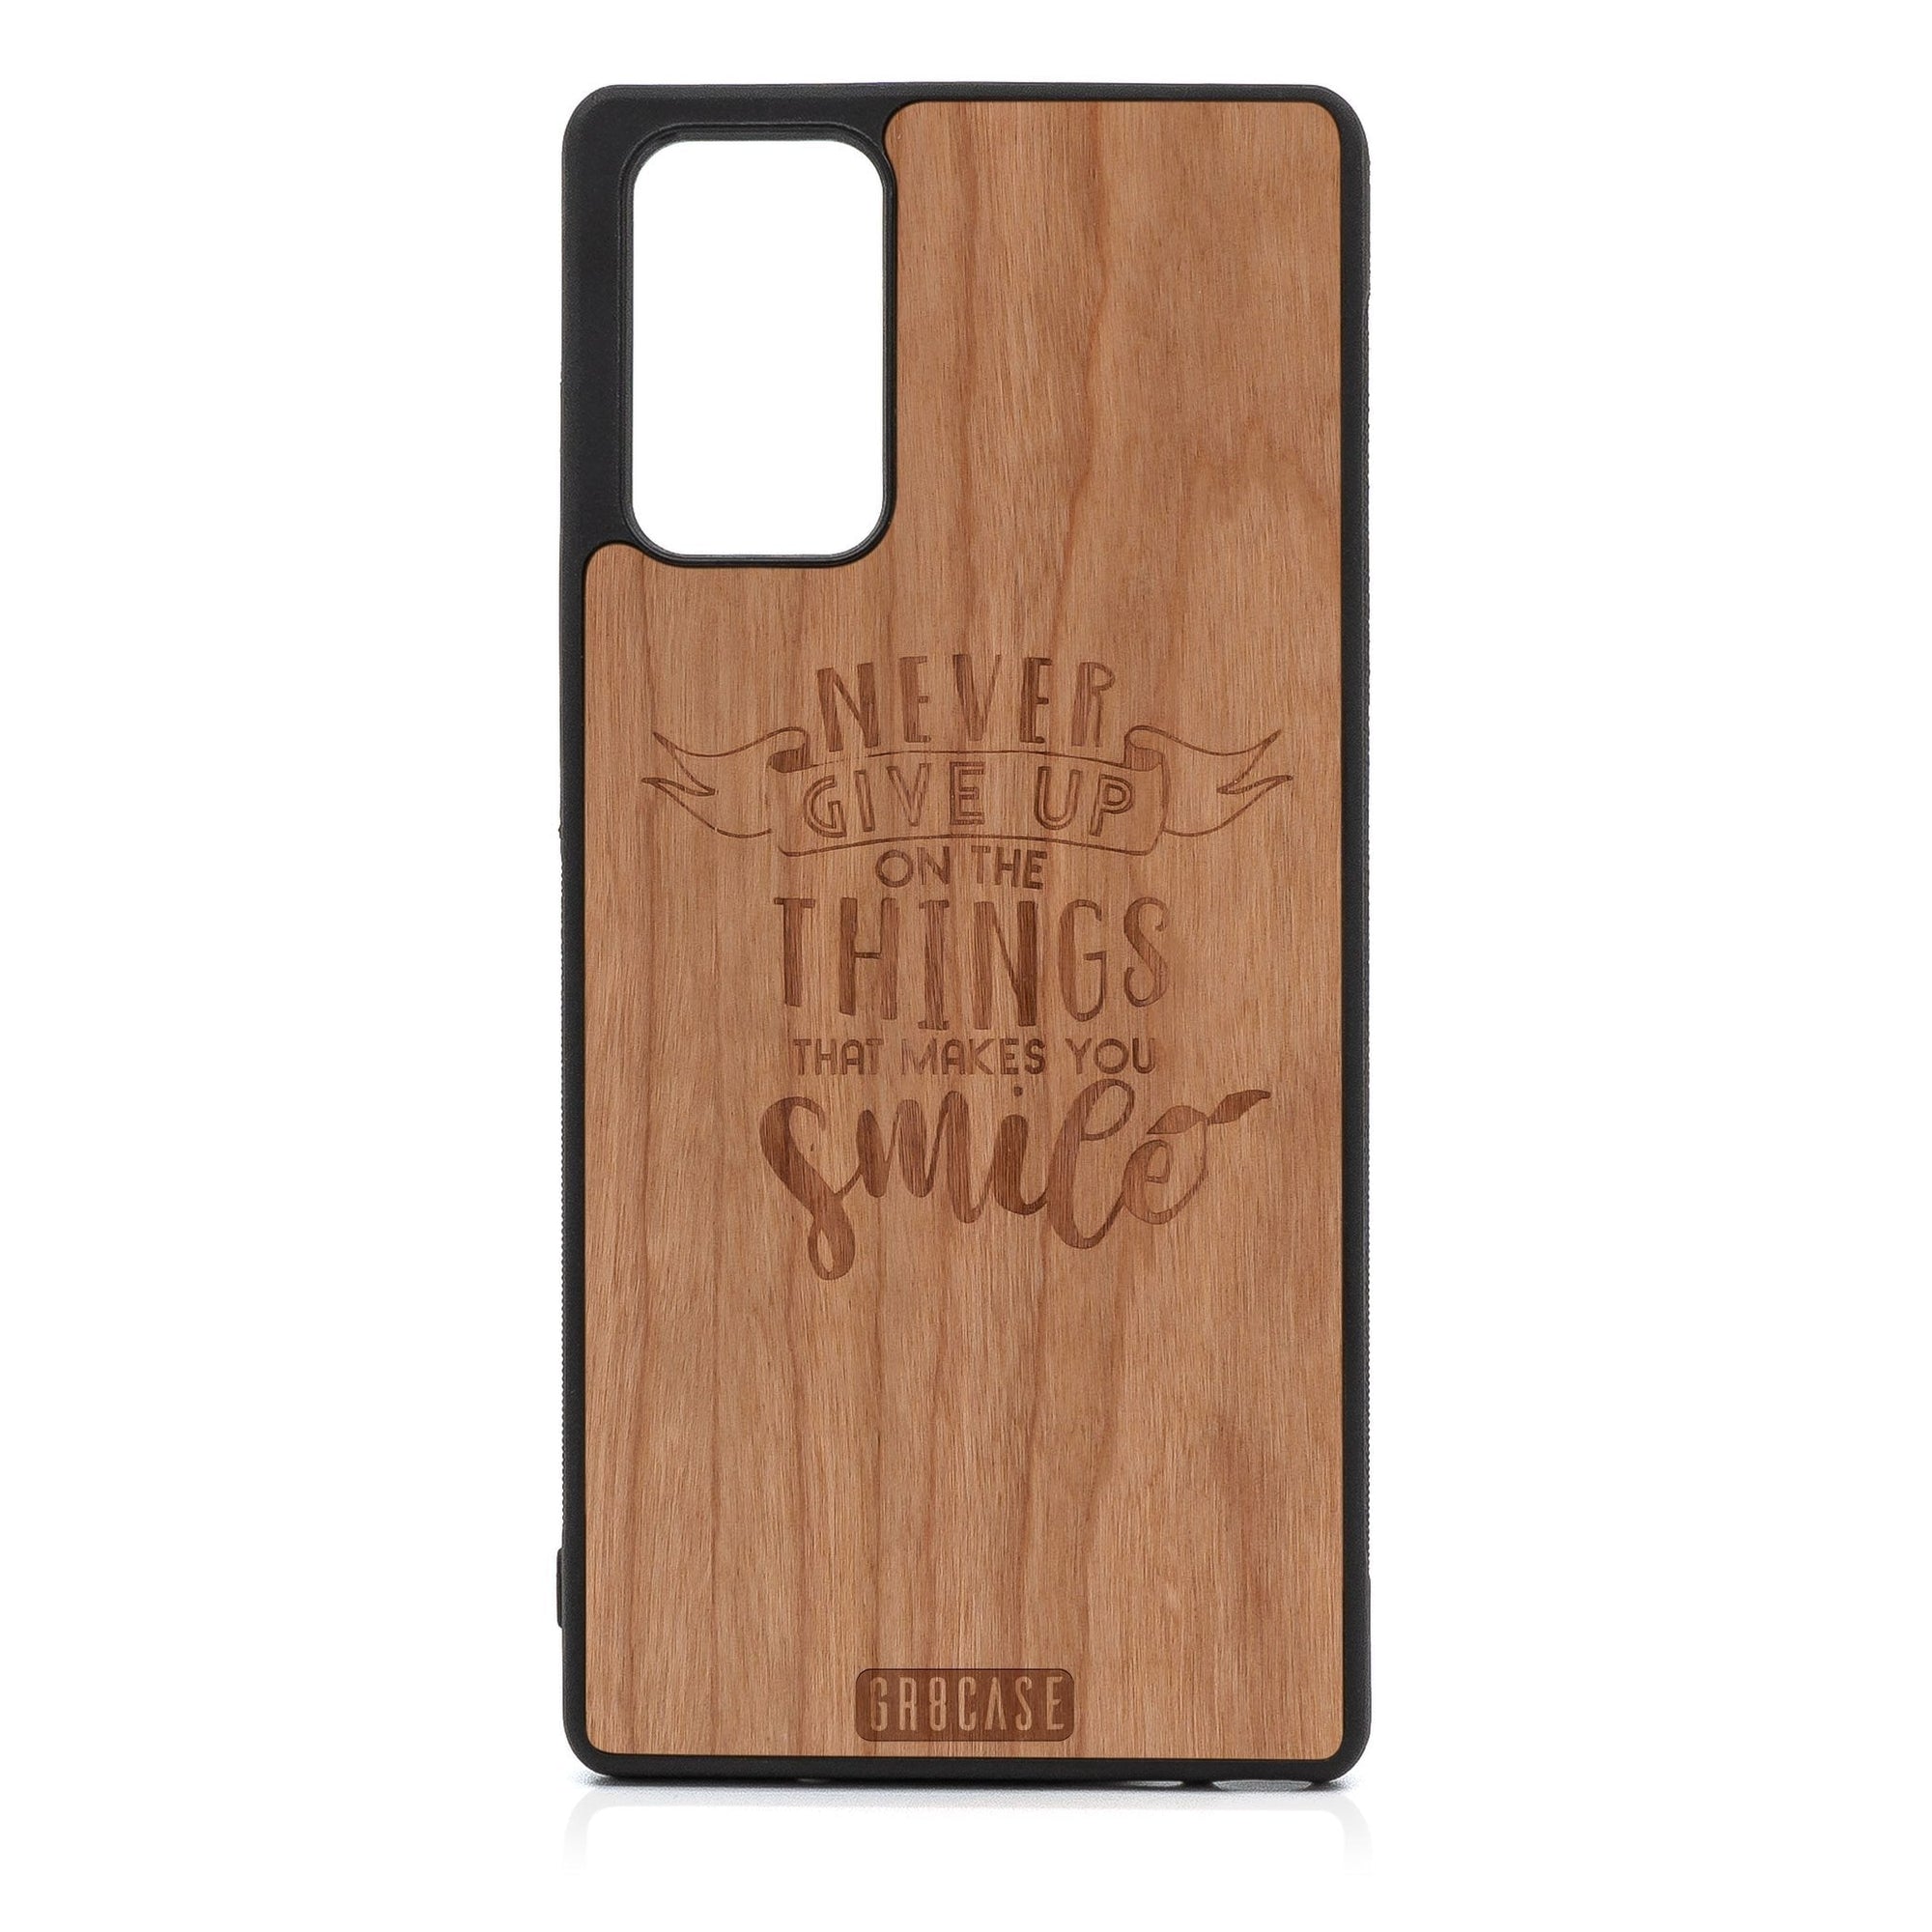 Never Give Up On The Things That Makes You Smile Design Wood Case For Samsung Galaxy A73 5G